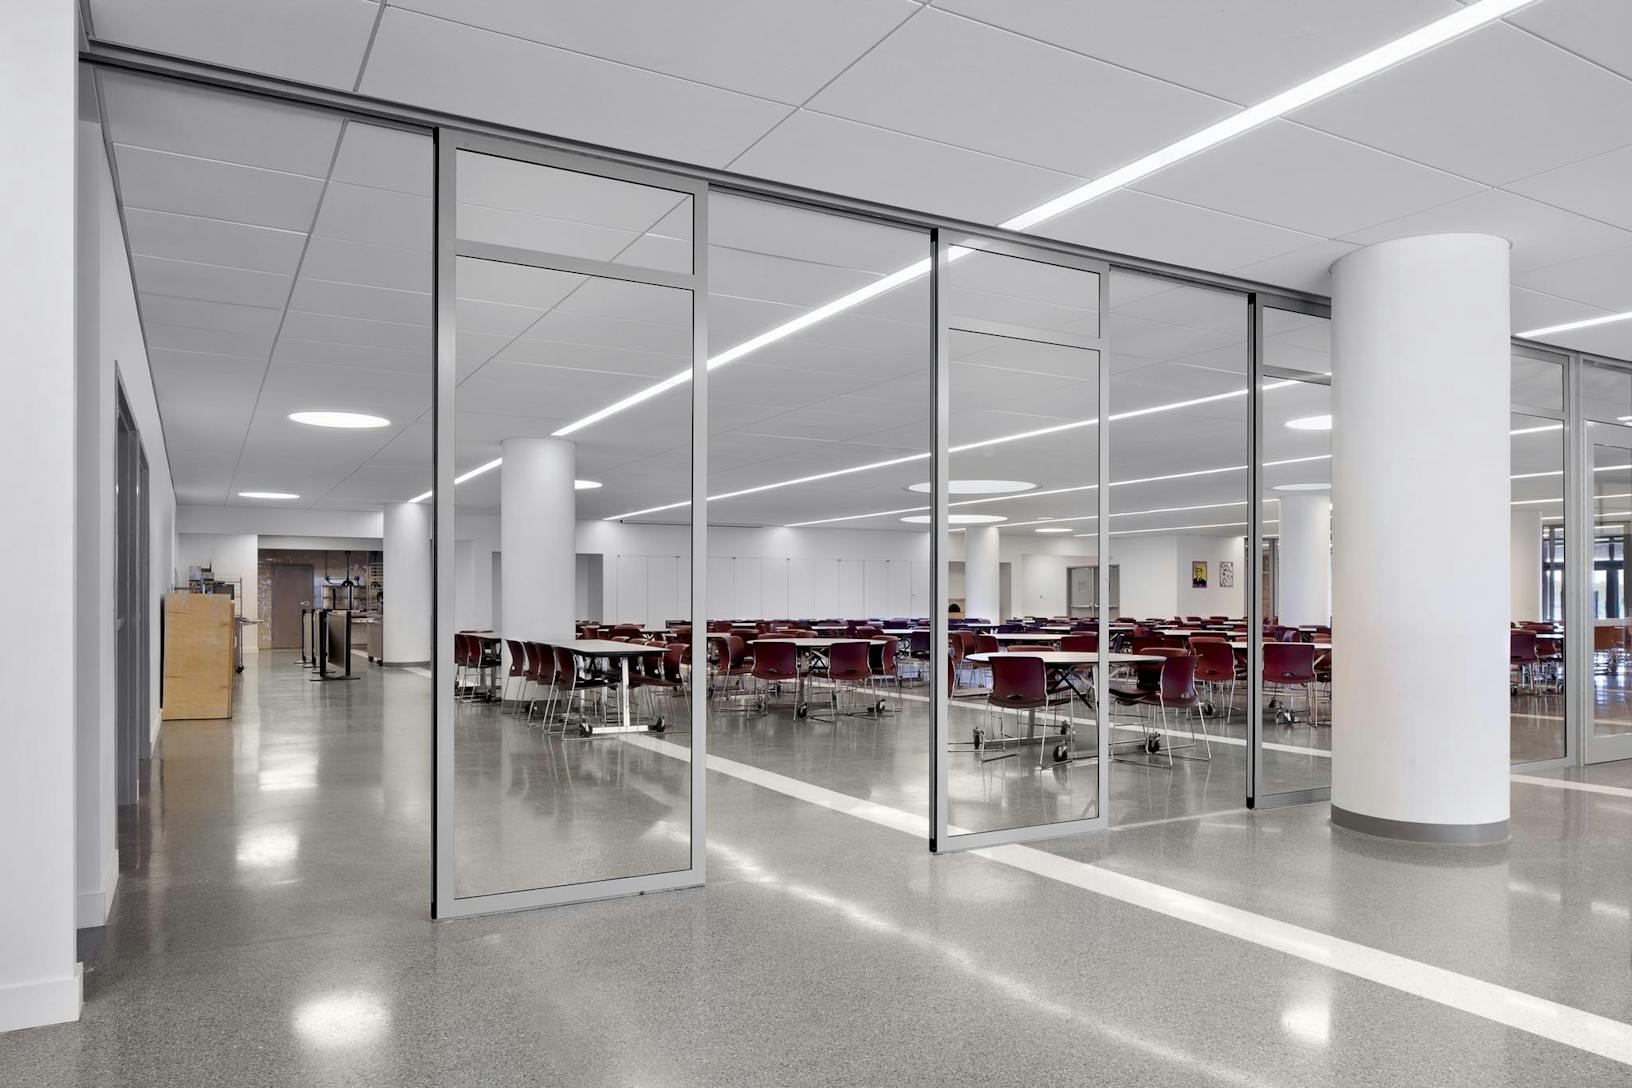 Commercial segmented curved sliding glass walls at The Union Nations International School in NY